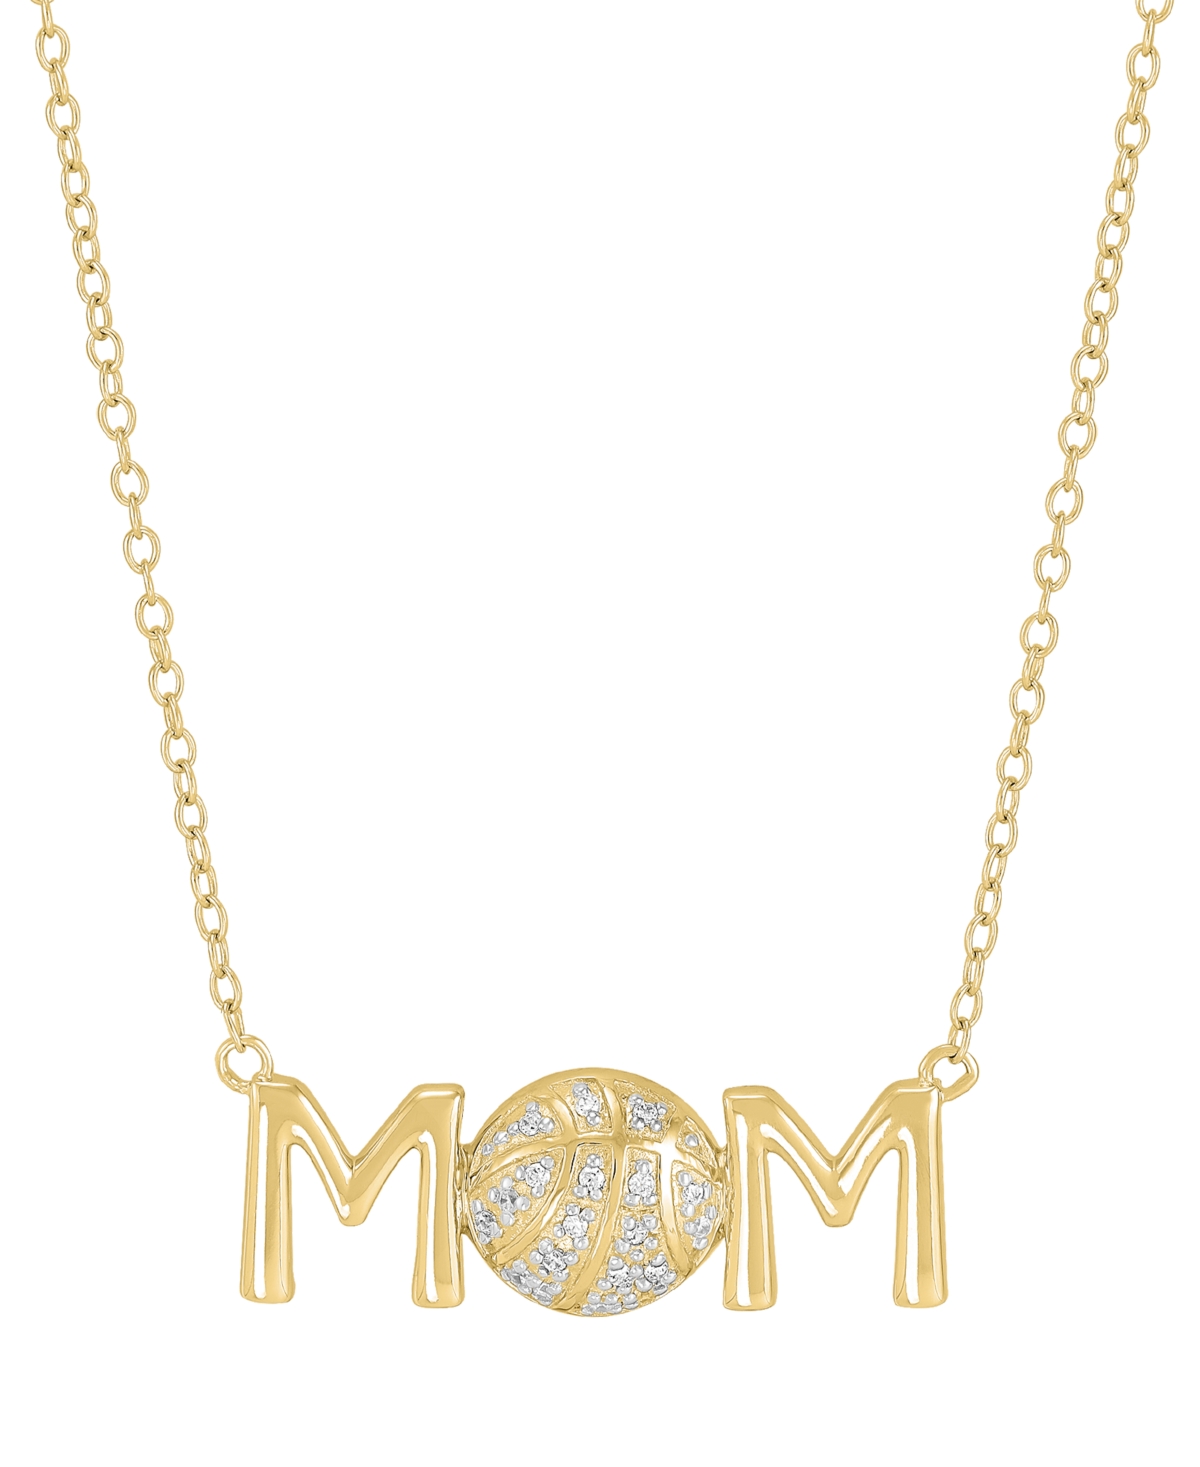 Diamond Basketball Mom Pendant Necklace (1/20 ct. t.w.) in Sterling Silver or 14k Gold-Plated Sterling Silver, 16" + 2" extender - Gold-Plated Sterlin